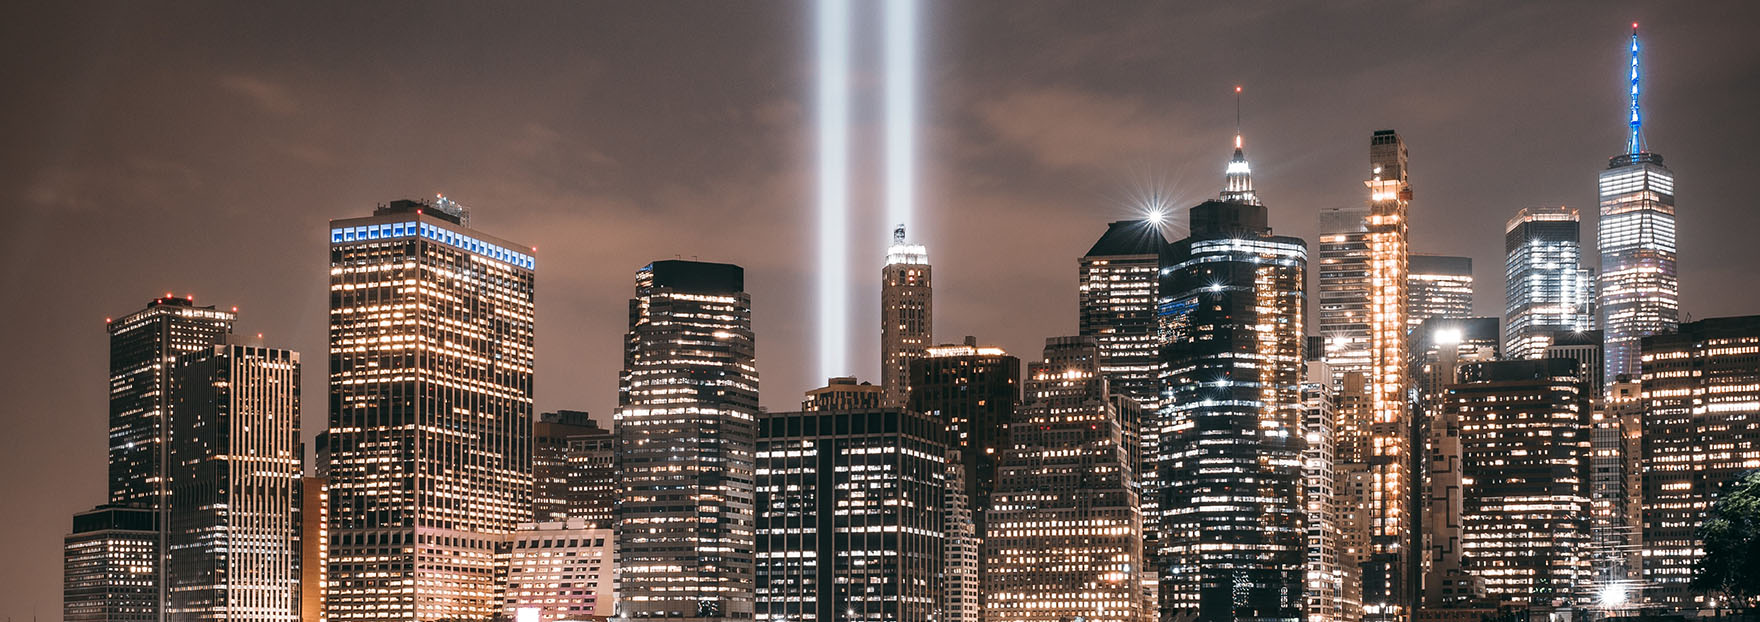 The twin bars of light signify the loss of the World Trade Center on 9 11 2001 | photo by Lerone Pieters